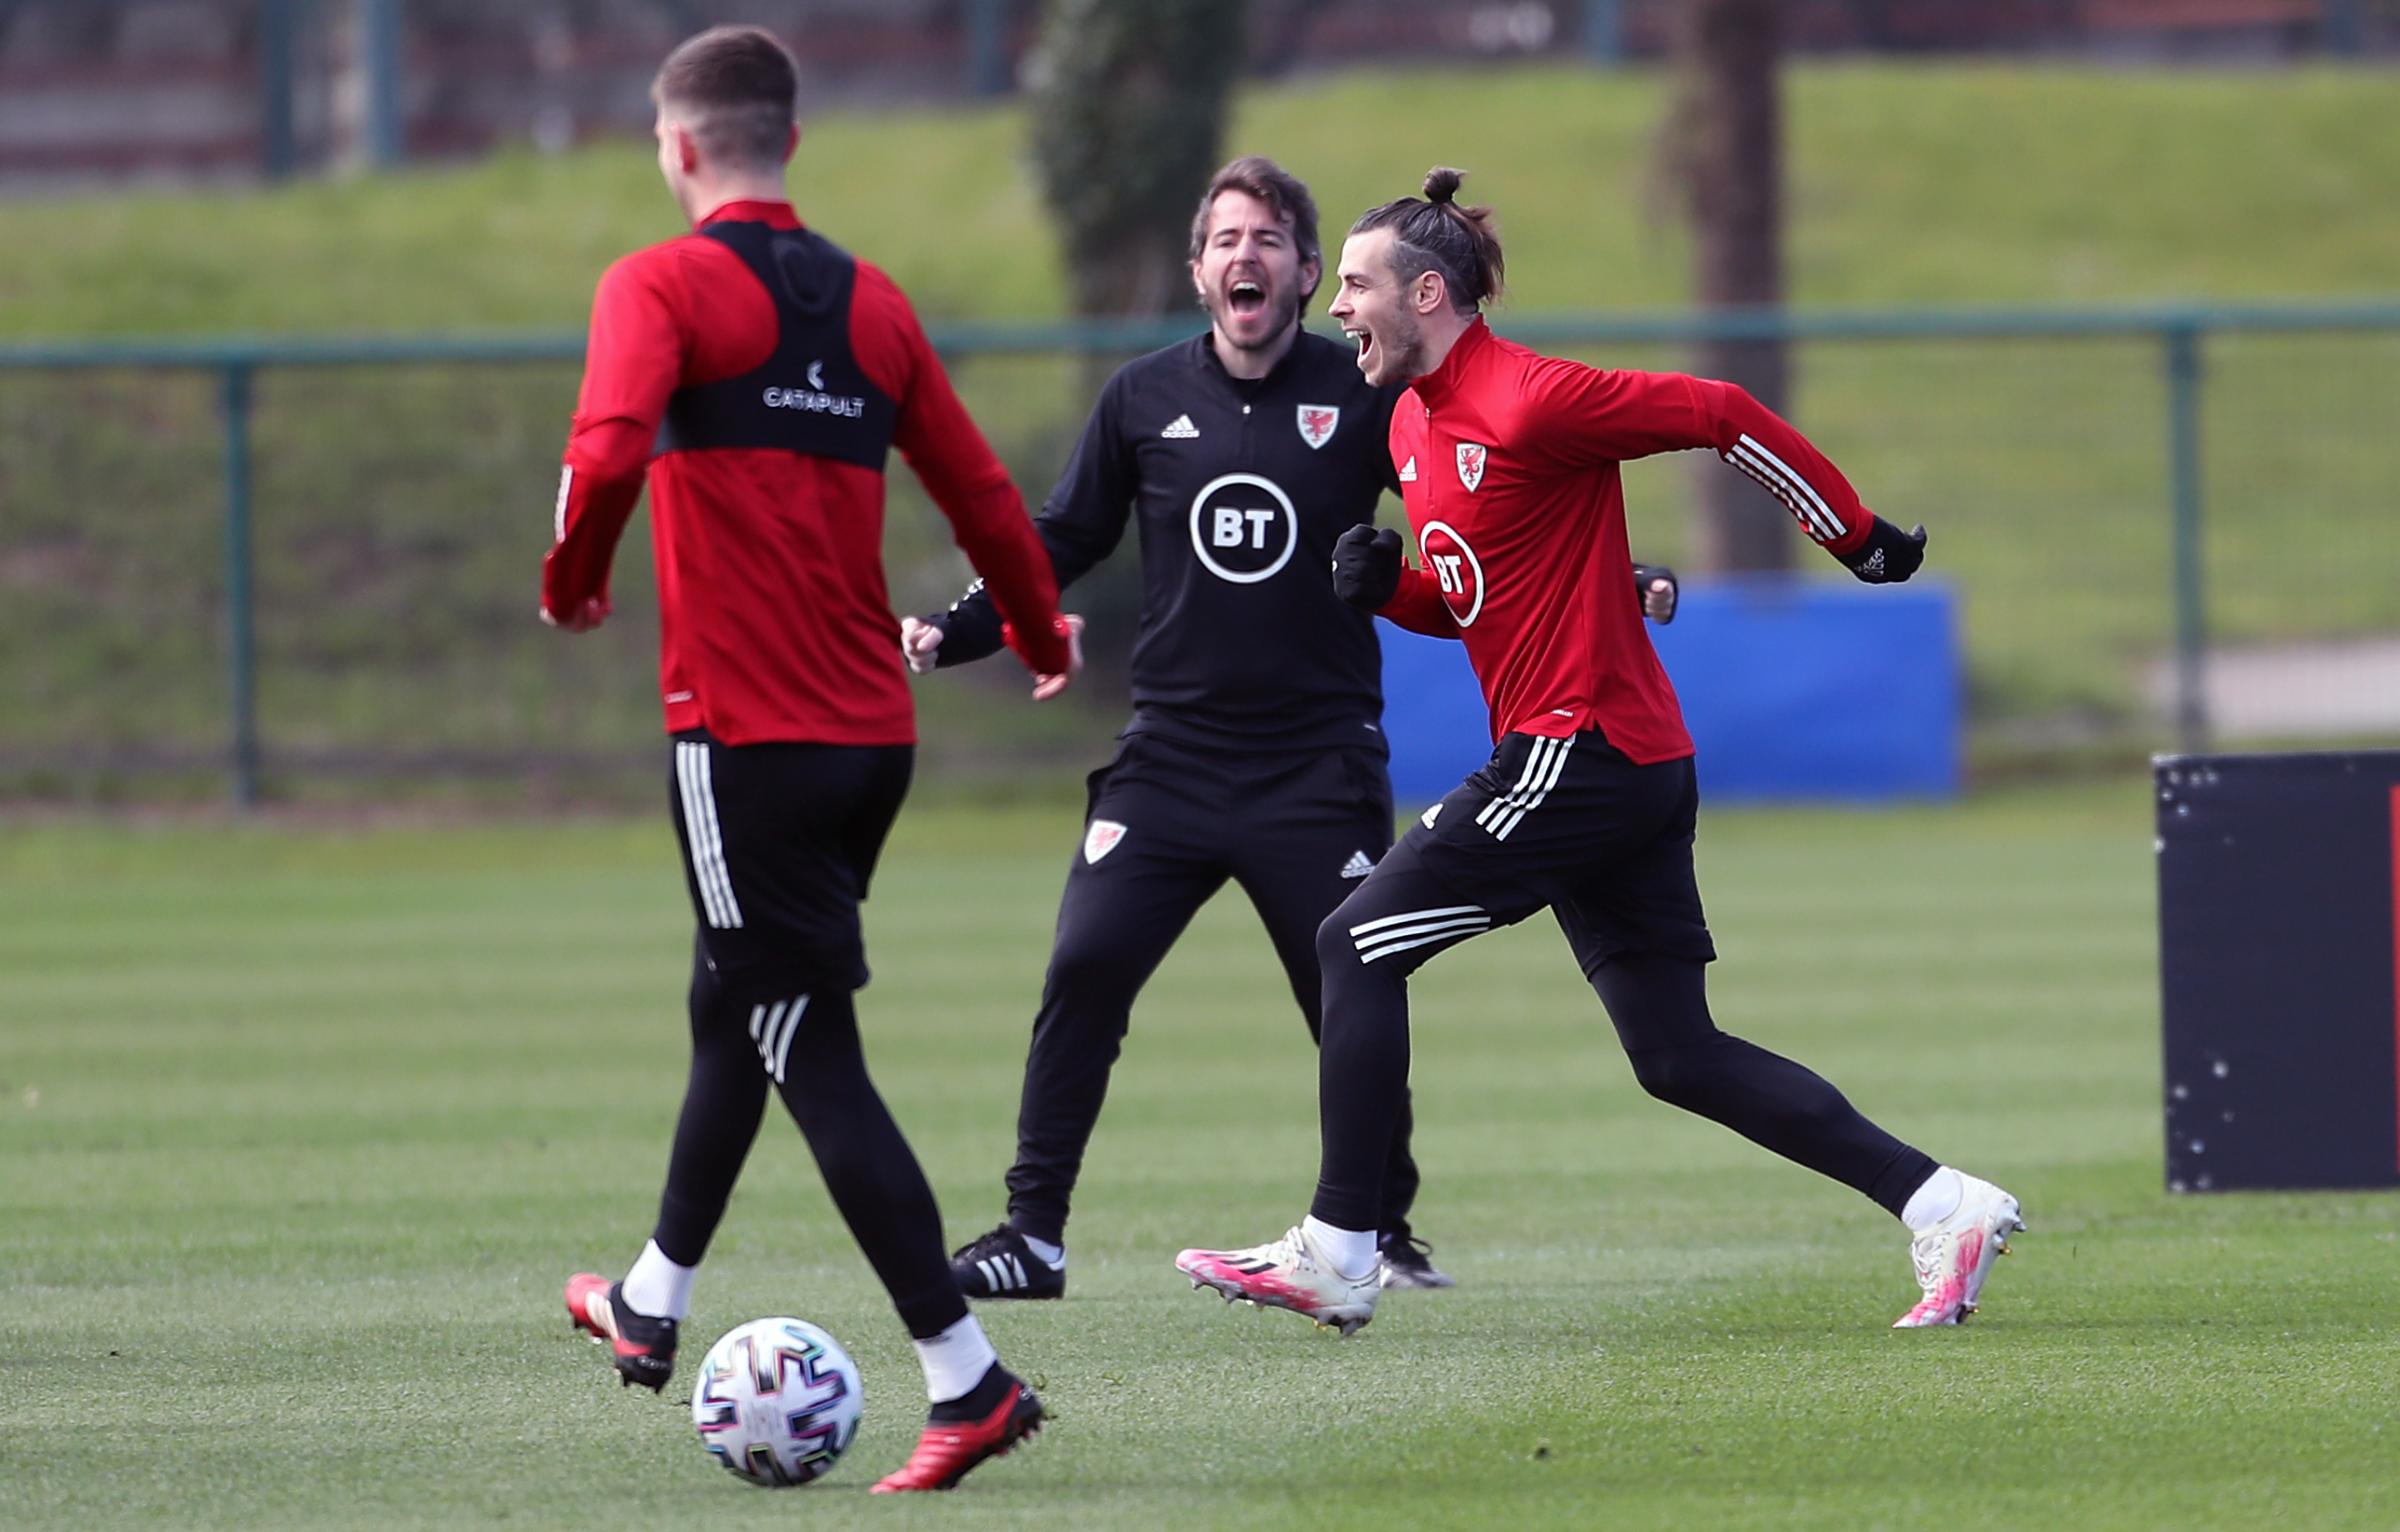 Wales Gareth Bale celebrates during the training session at The Vale Resort, Glamorgan. Picture date: Tuesday March 23, 2021.